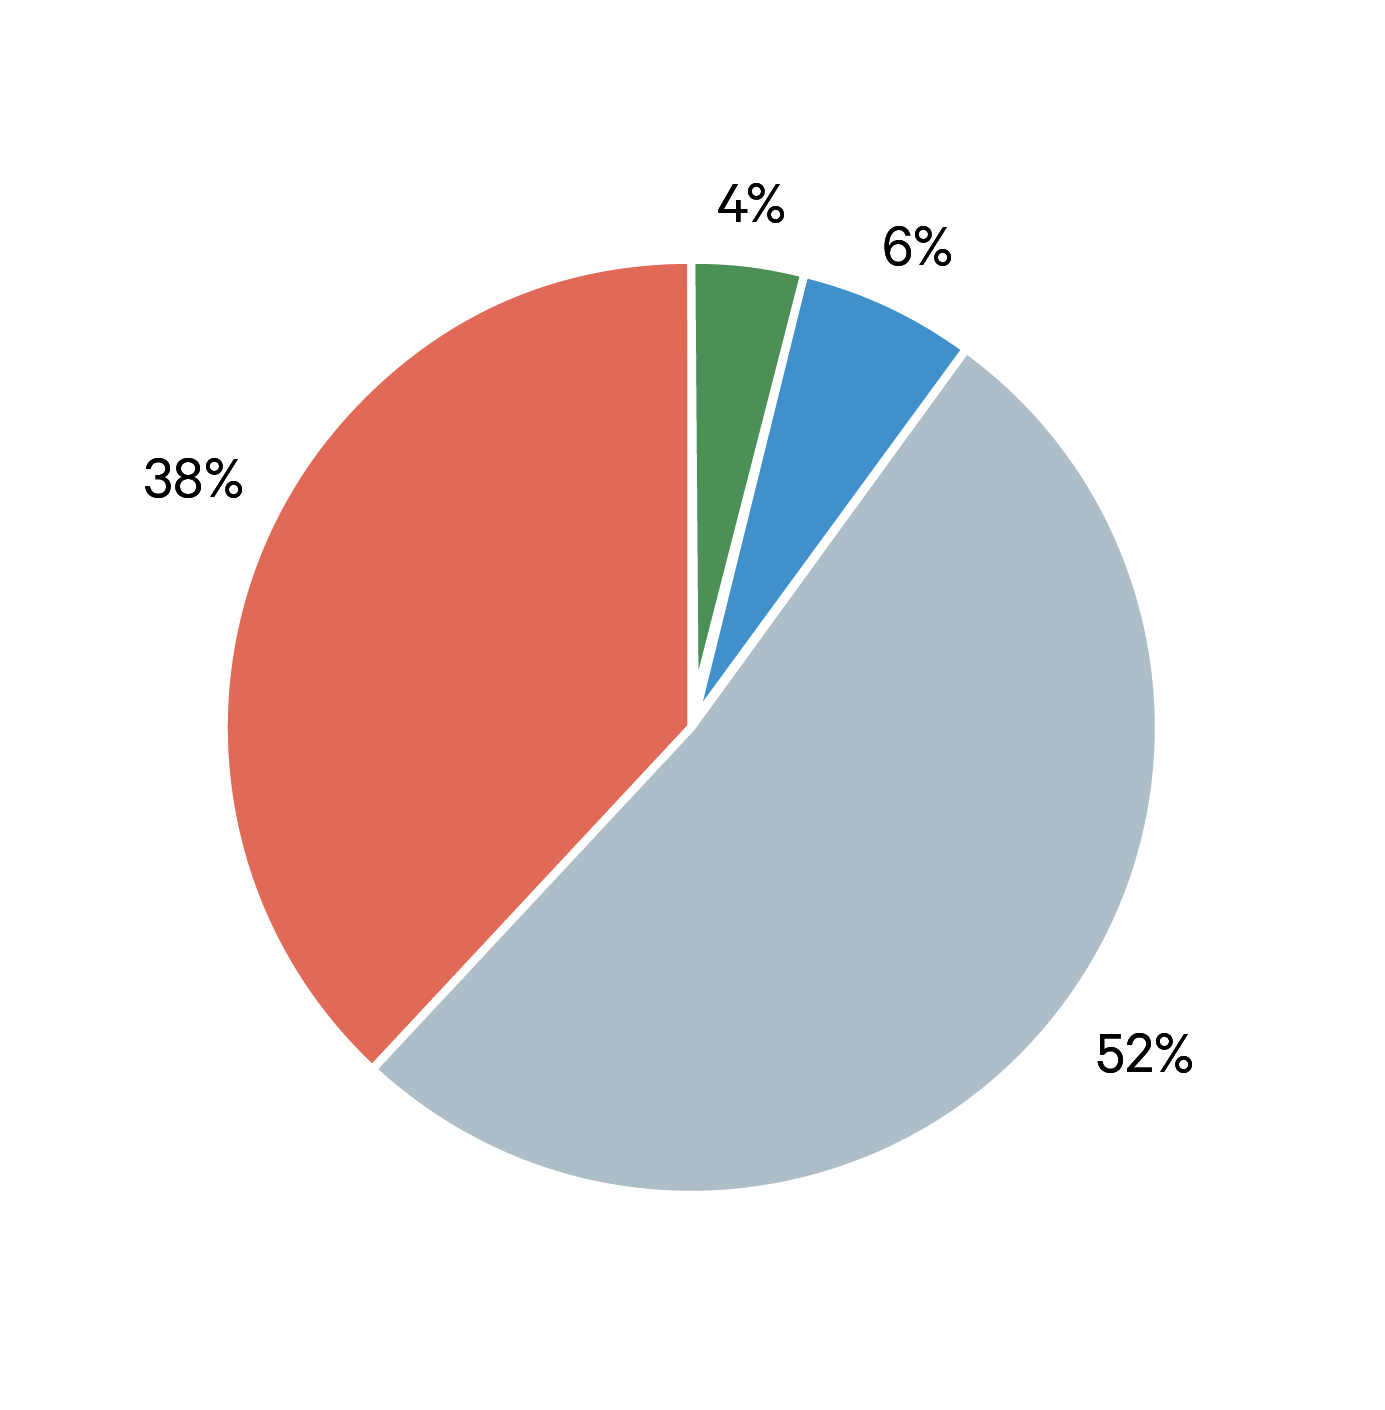 Pie-chart graphic. 52% is colored gray. 38% is peach. 6% is light blue. 4% is light green.